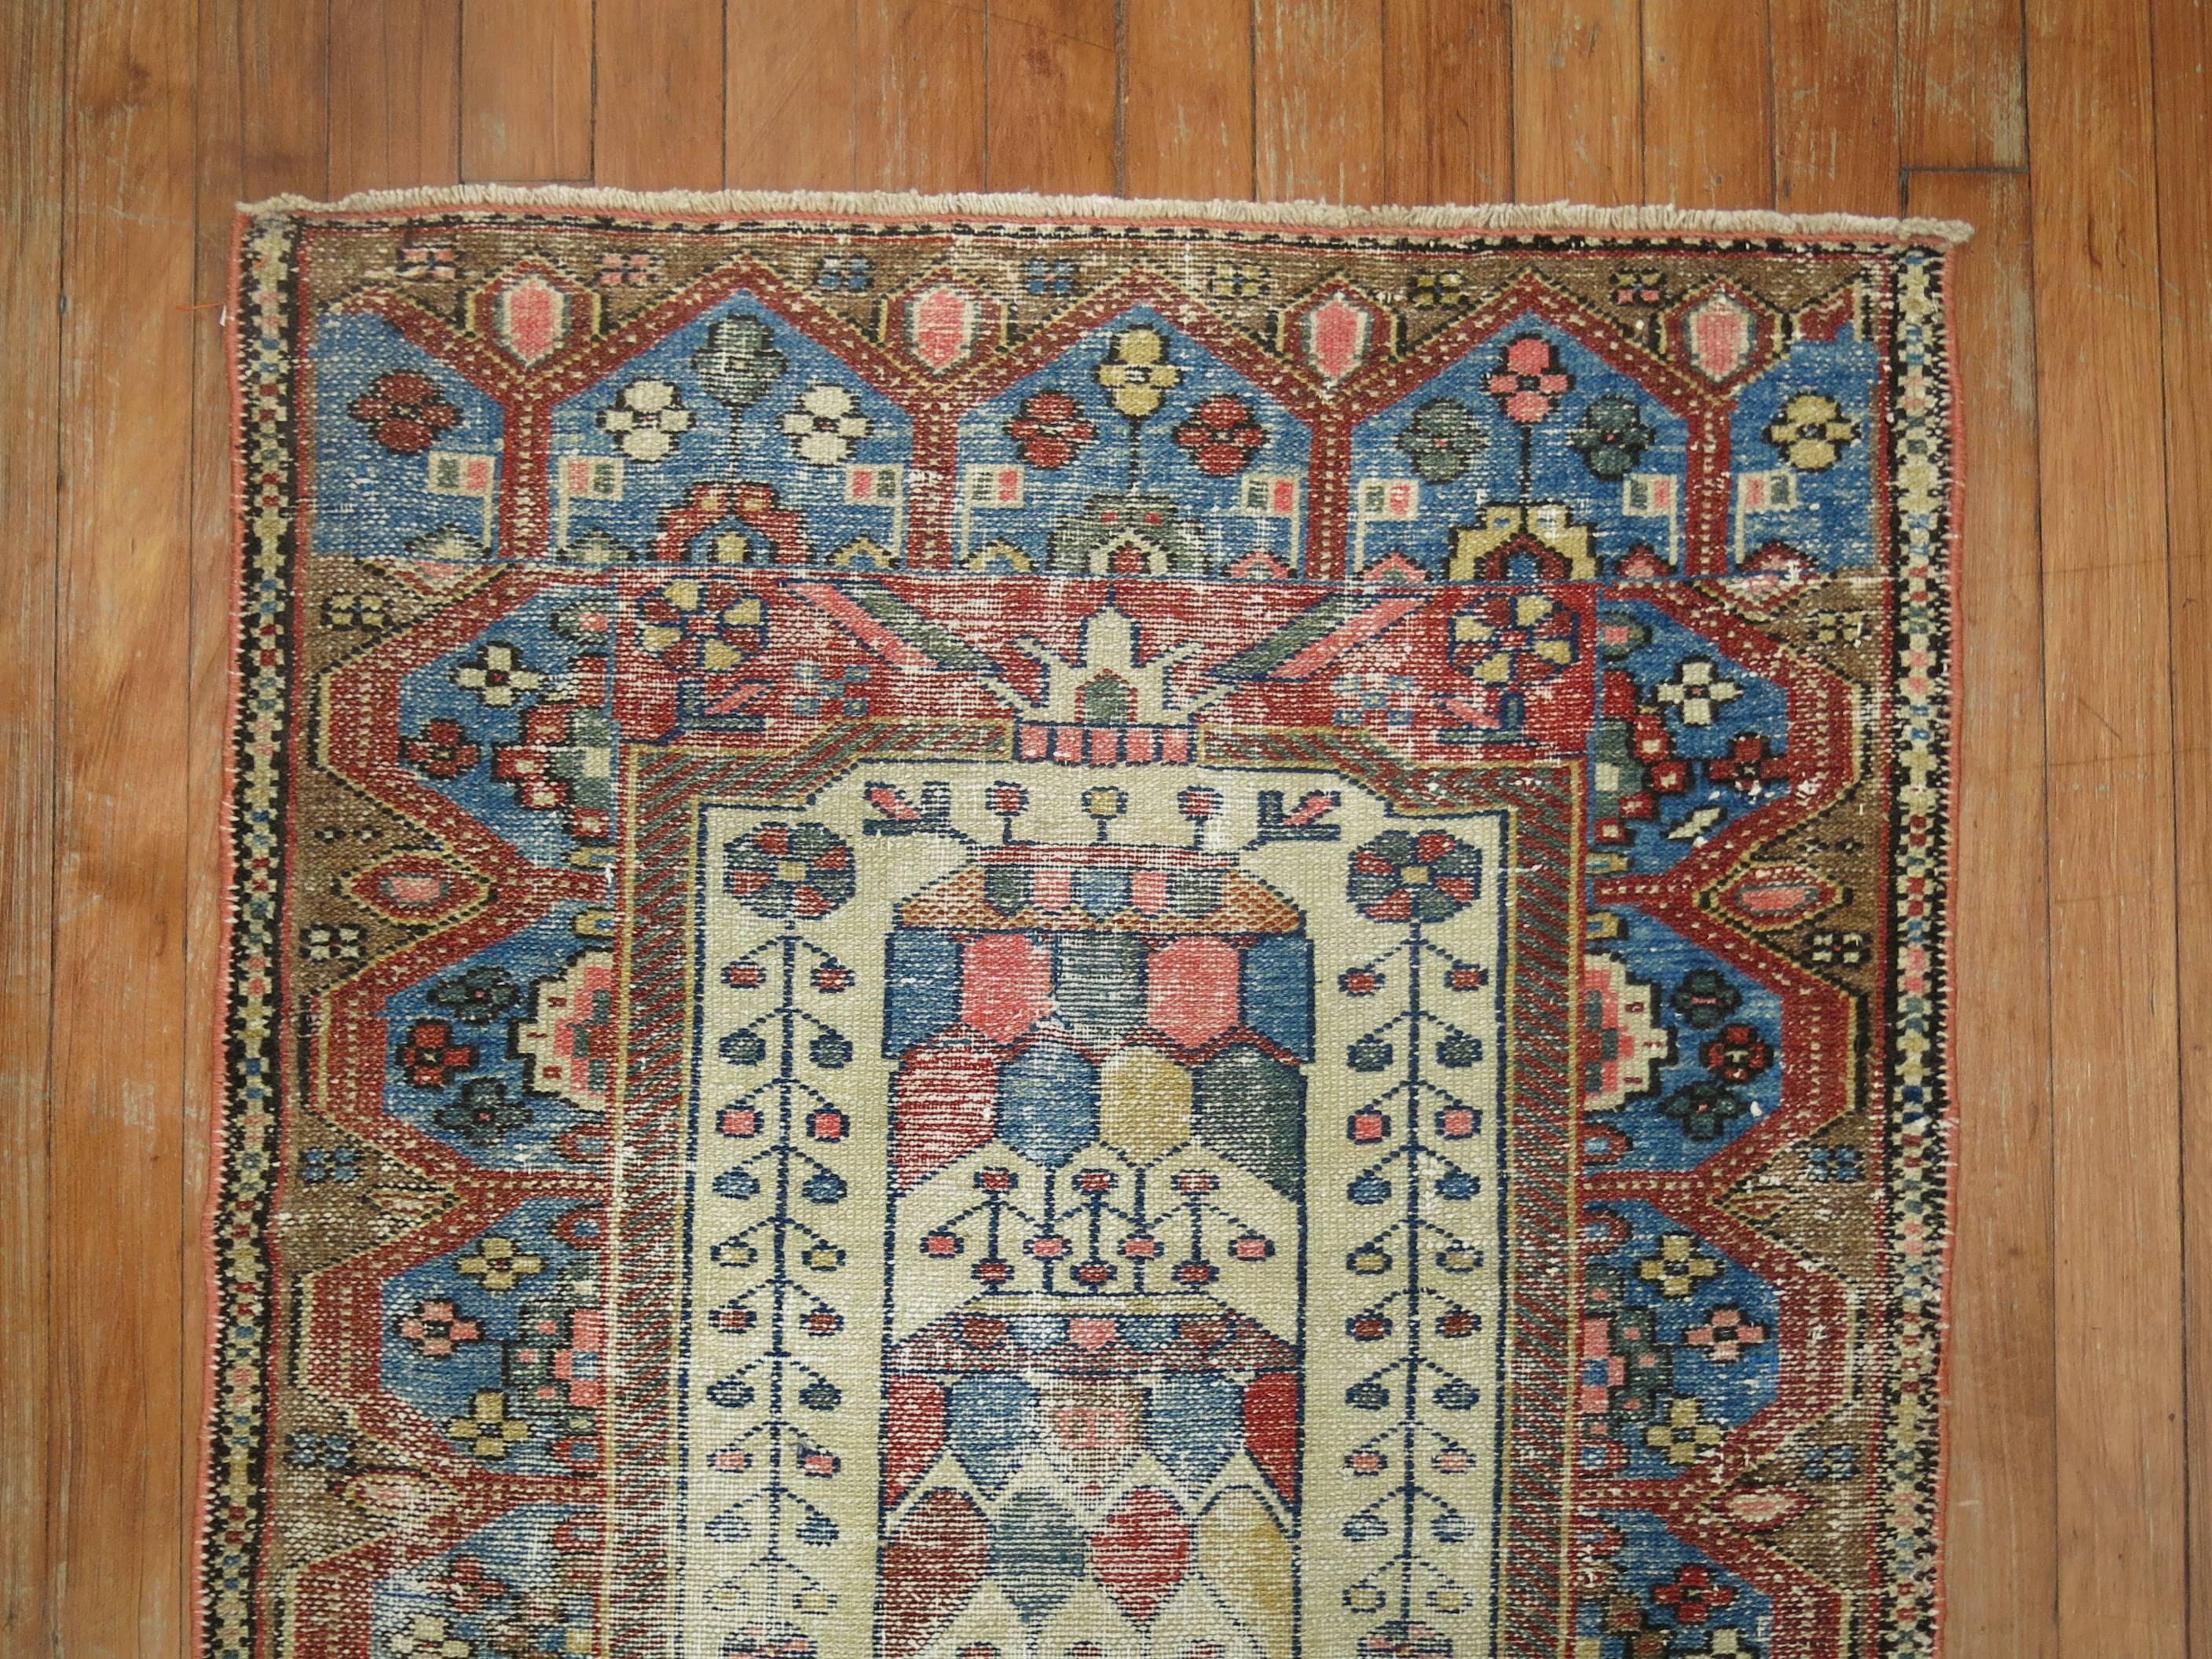 Shabby Chic Persian Malayer rug with featuring an intricate design.